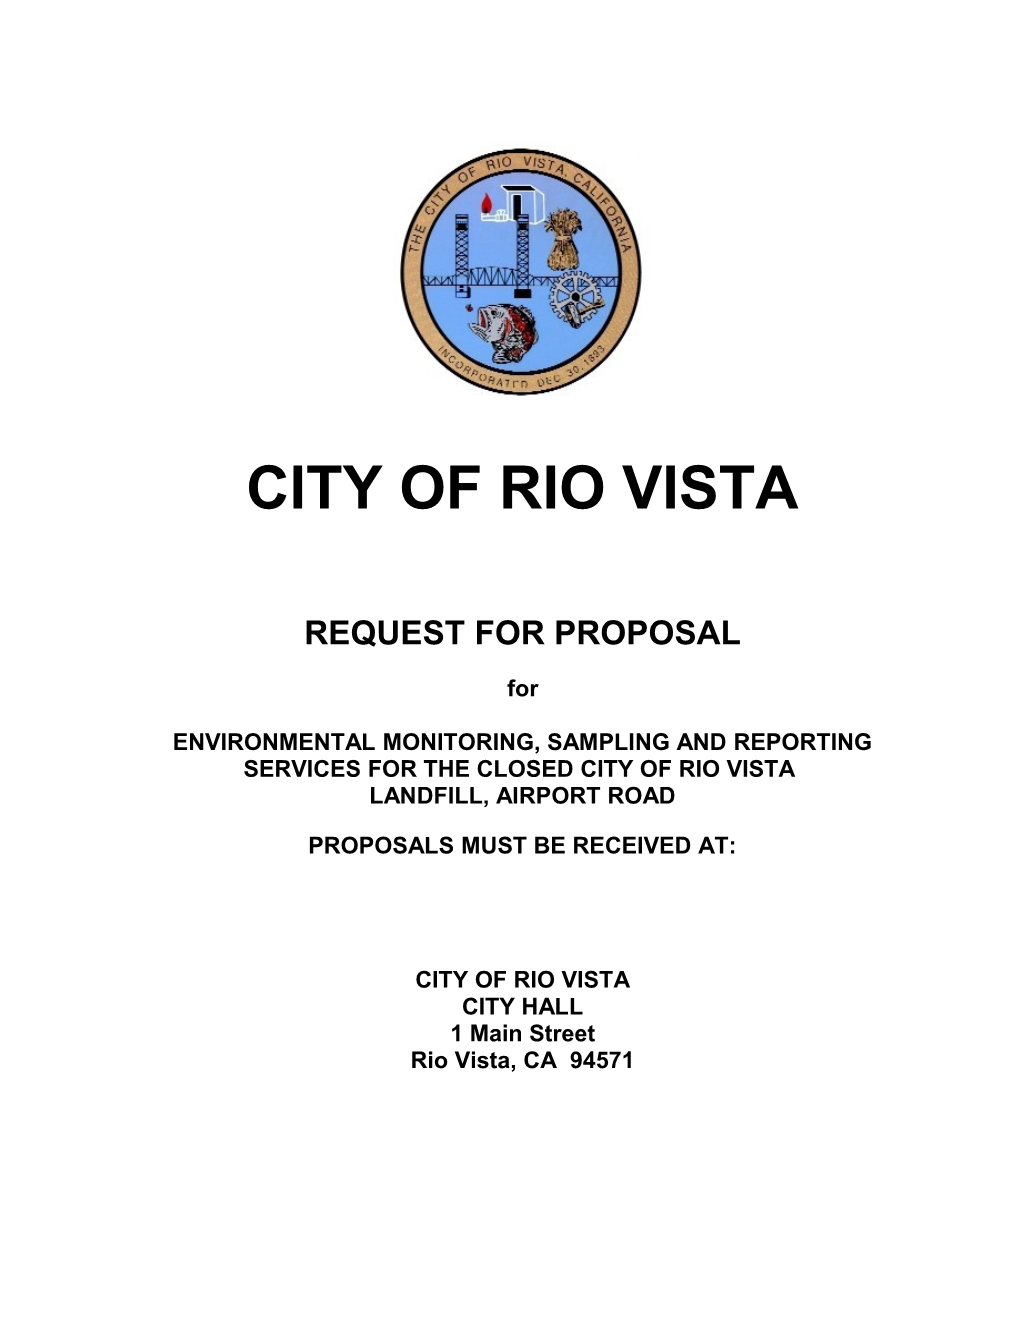 Environmentalmonitoring, Sampling and Reporting Services for the Closed City of Riovista